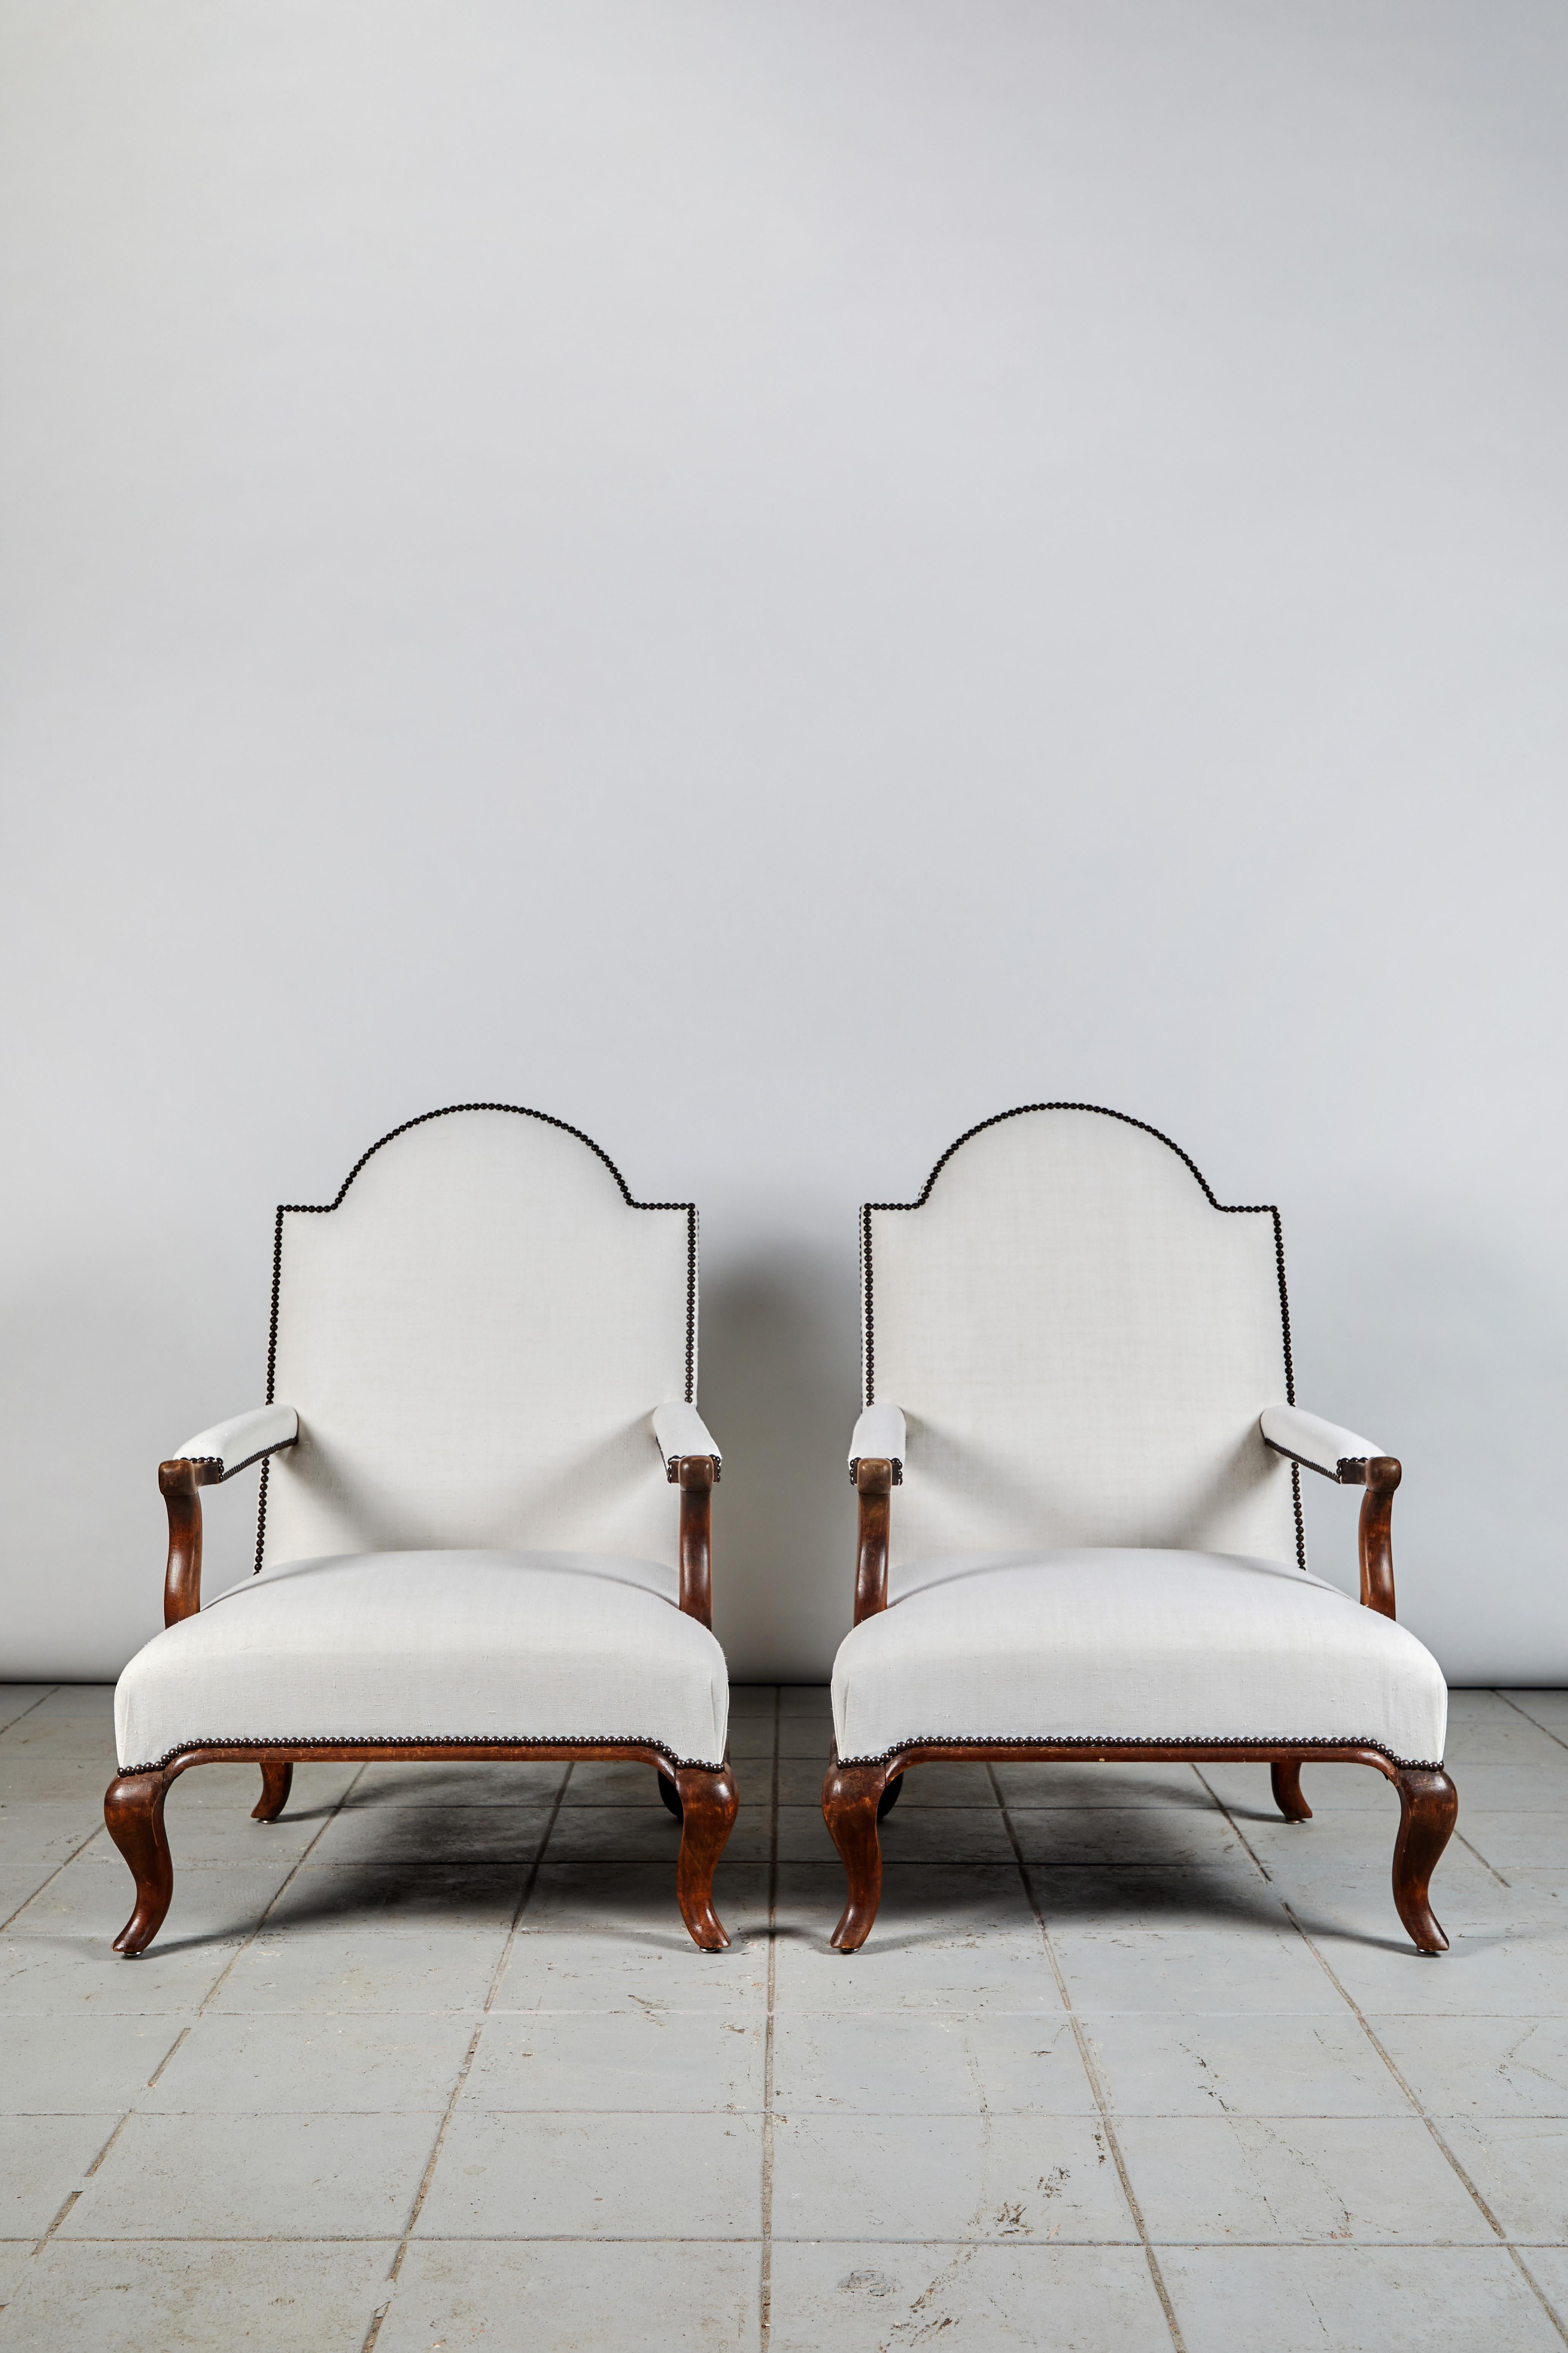 Pair of neoclassical Italian chairs upholstered in Belgian linen with new nail heads. The armchairs have a beautiful original stain to the wood.